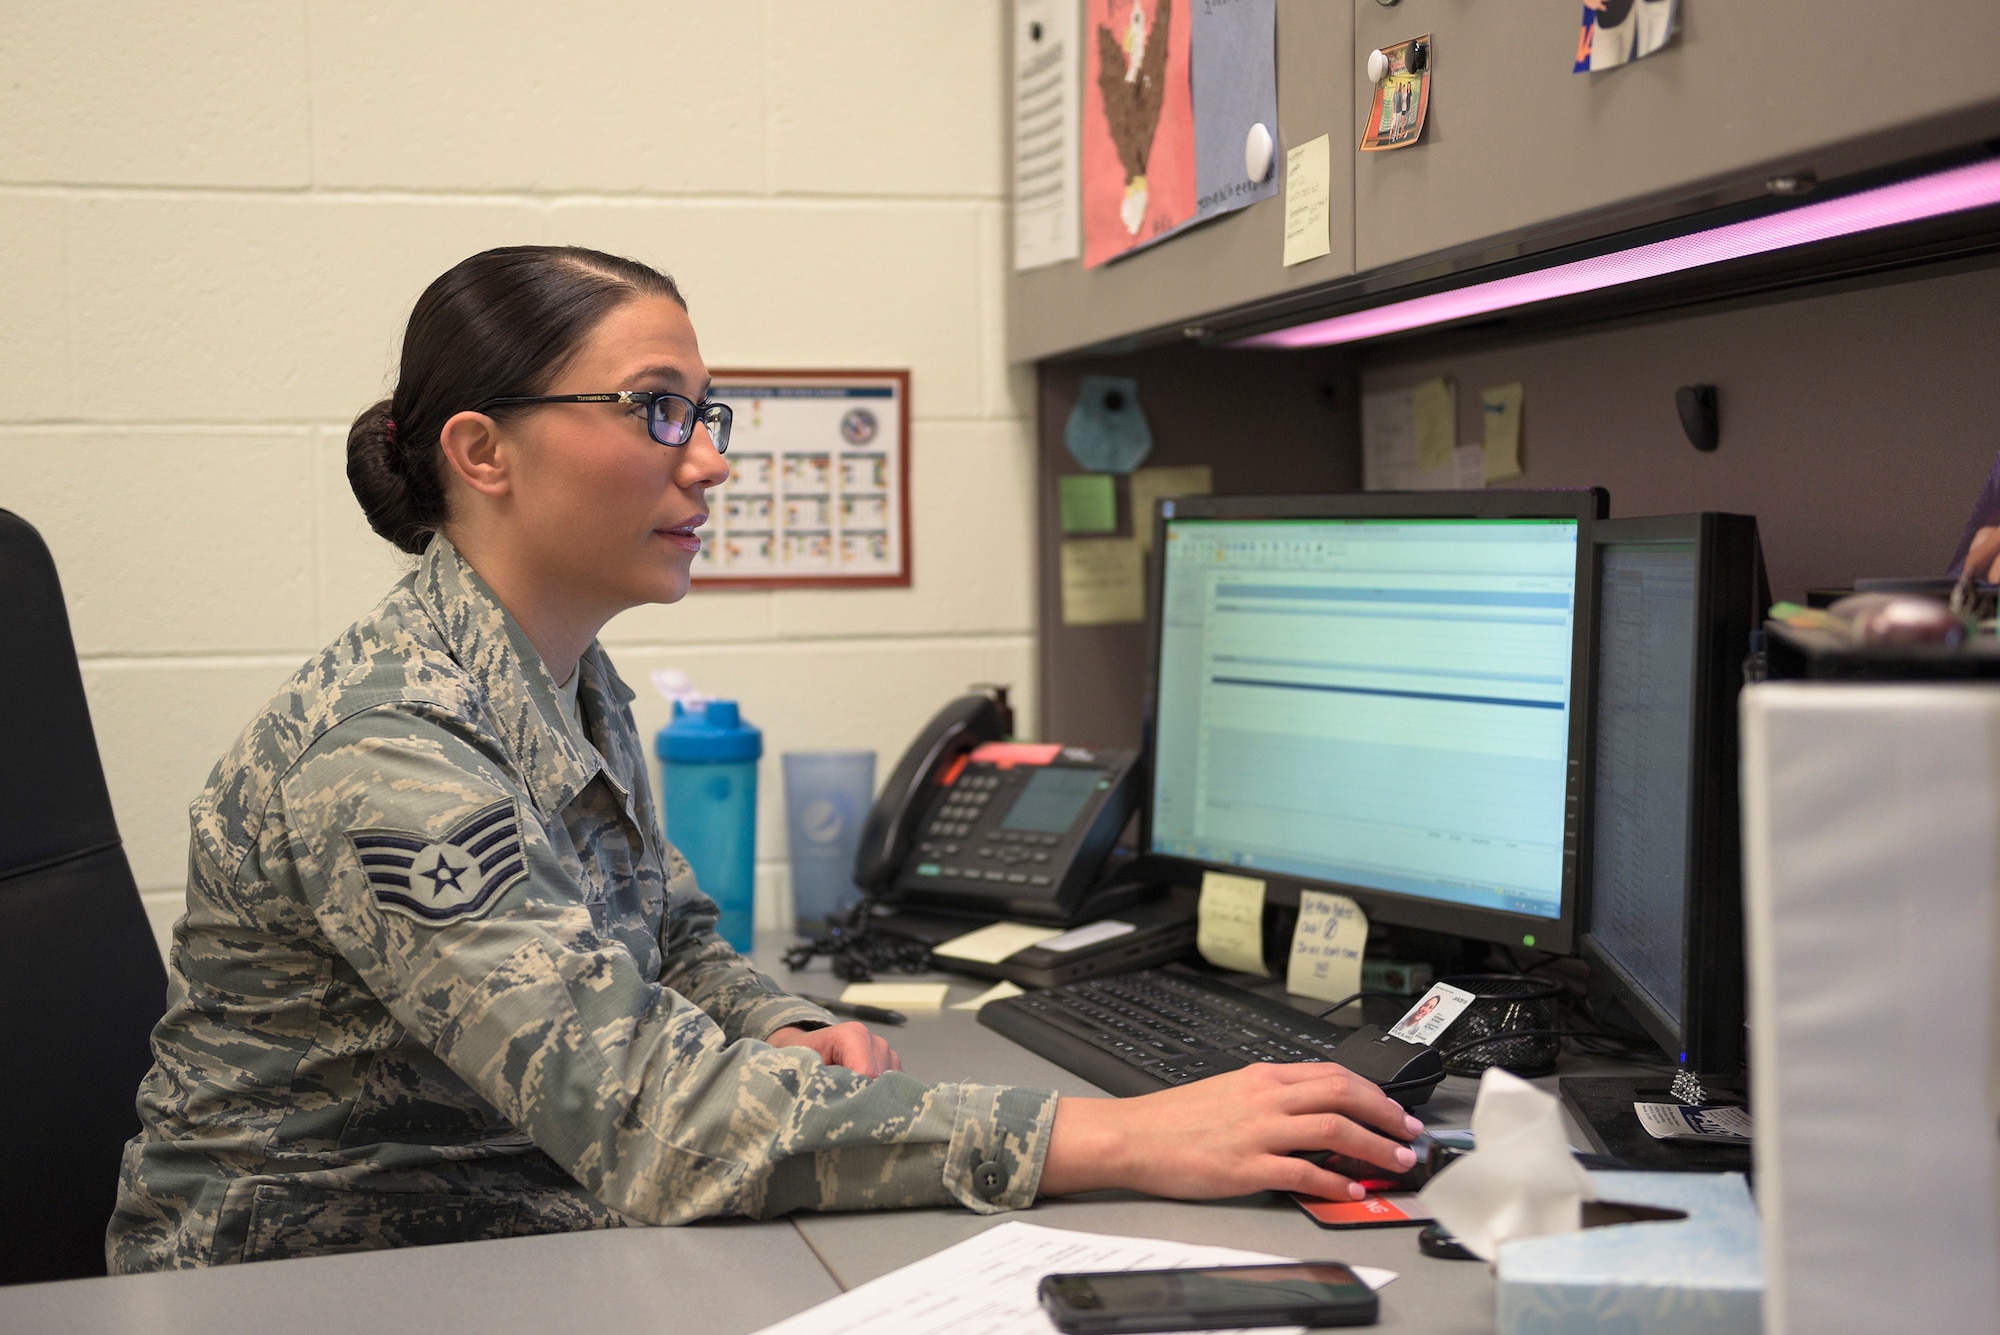 U.S. Air Force Staff Sgt. Rachael L. Blasko, an enlisted accessions recruiter with the 182nd Force Support Squadron, Illinois Air National Guard, reviews at her enlistment appointments at the 182nd Airlift Wing, Peoria, Ill., May 12, 2016. Blasko is the unit’s newest recruiter and has been serving in that role for two years. (U.S. Air National Guard photo by Staff Sgt. Lealan Buehrer)